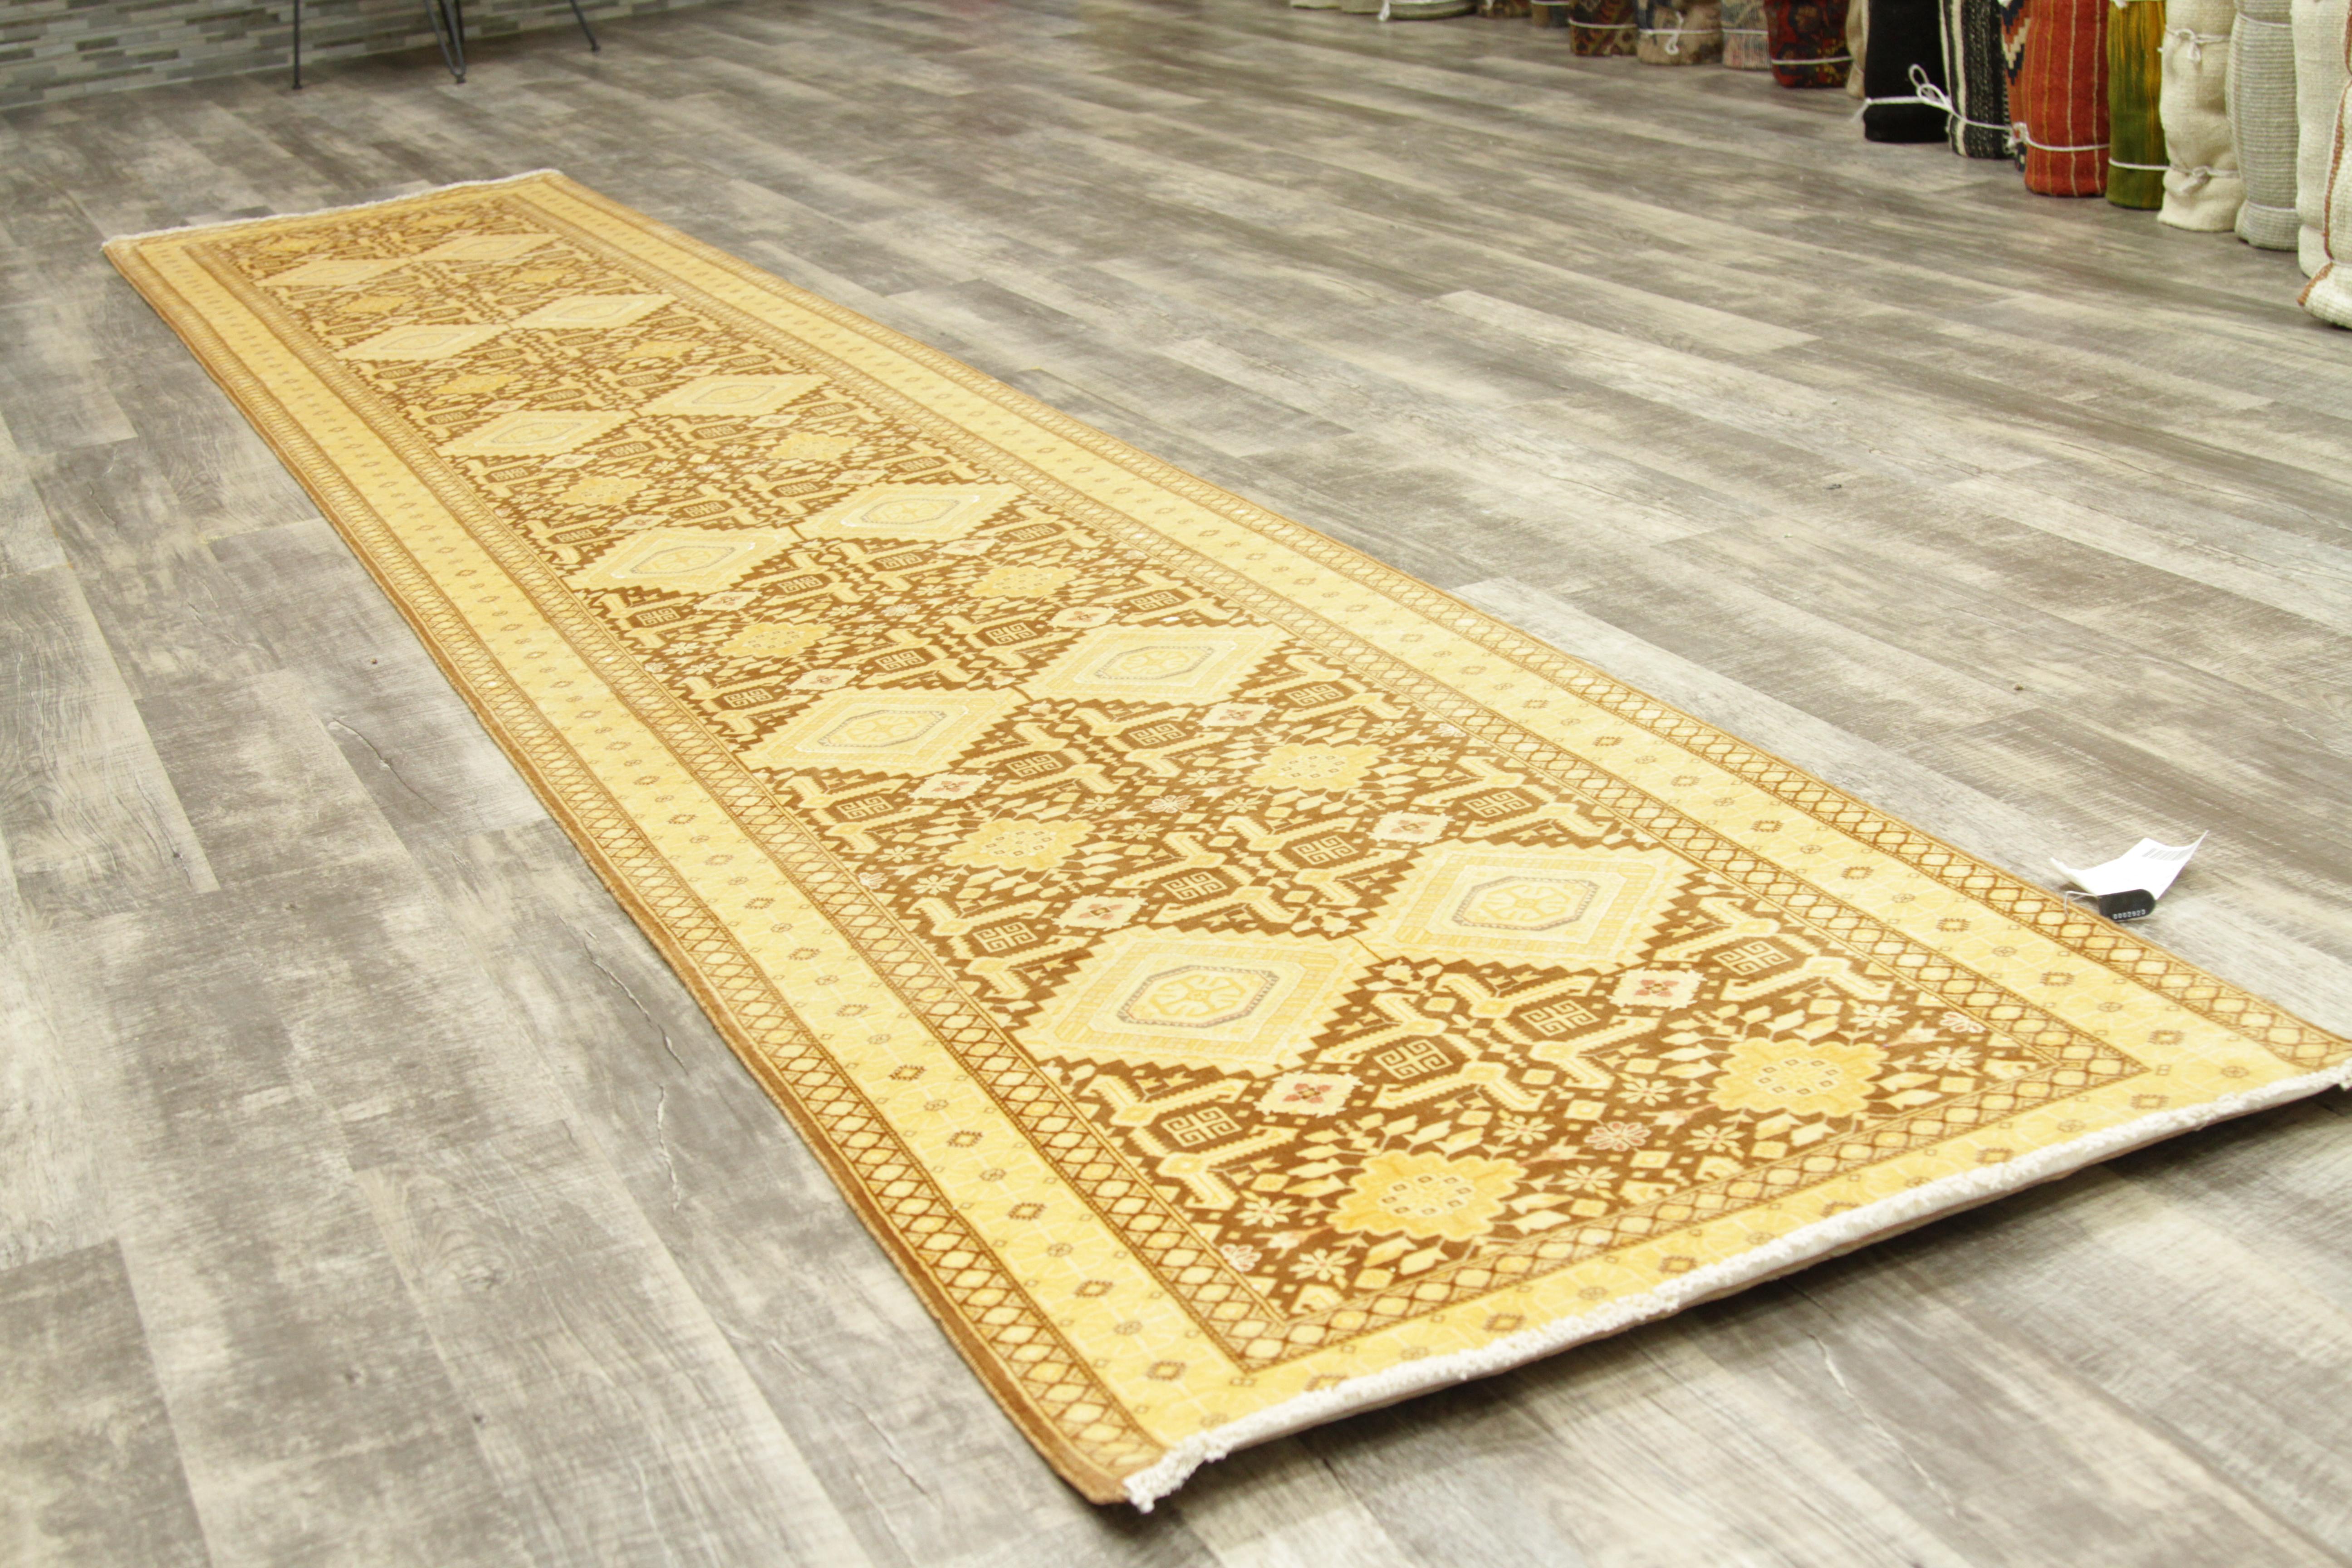 Antique Persian Rug in Tabriz Design with Gold & Brown Color Palette, circa 1940 For Sale 9